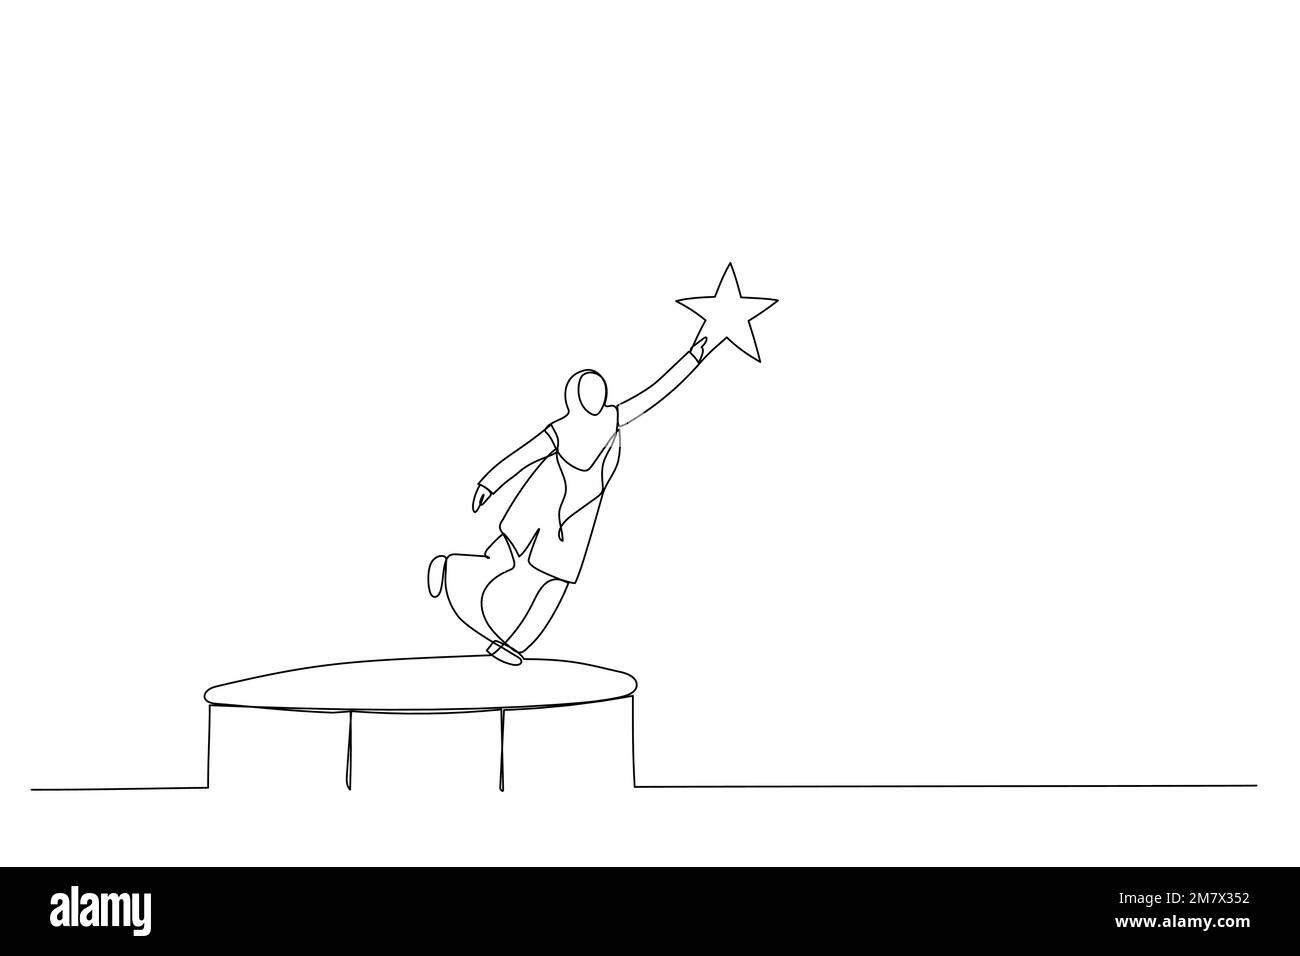 Illustration of muslim woman bounce on trampoline jump flying high to grab star. Metaphor for achievement. Single line art style Stock Vector